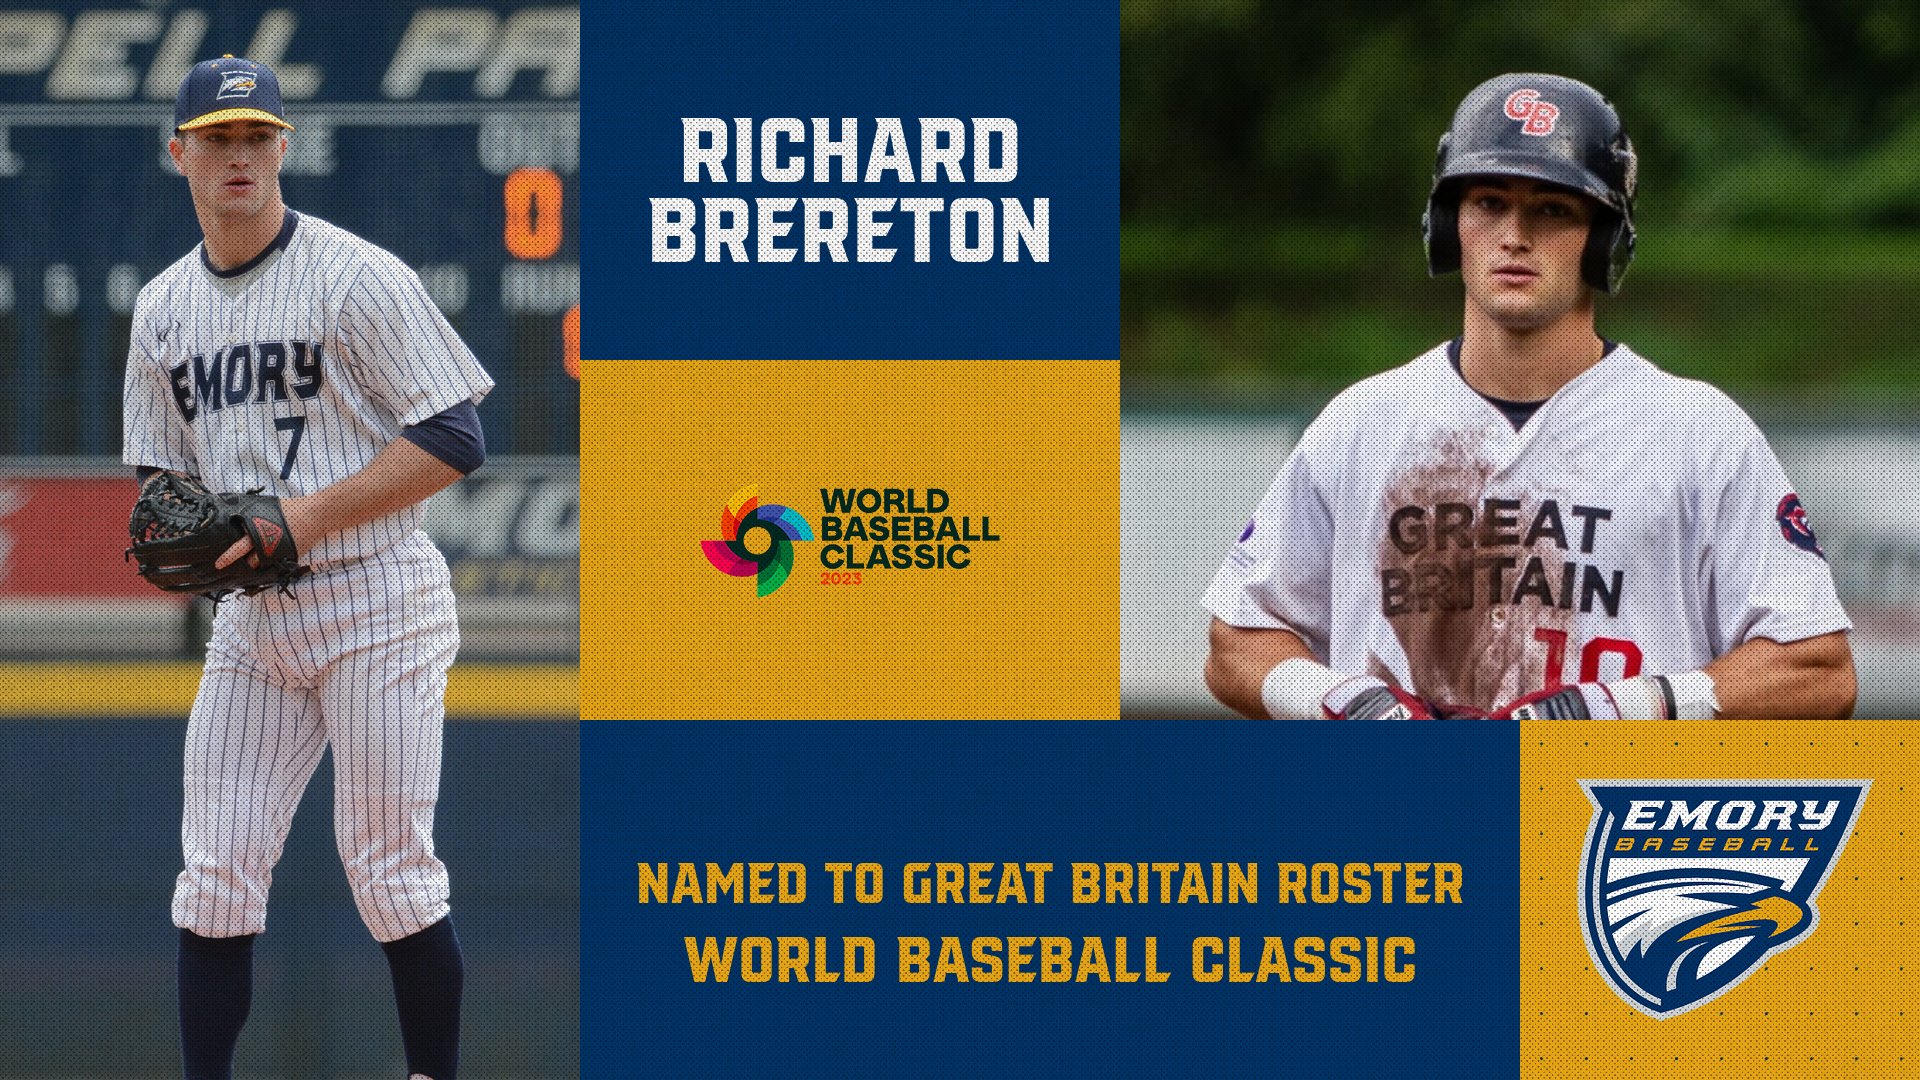 Graphic: One photo of Brereton in Emory Jersey and one in Great Britain jersey